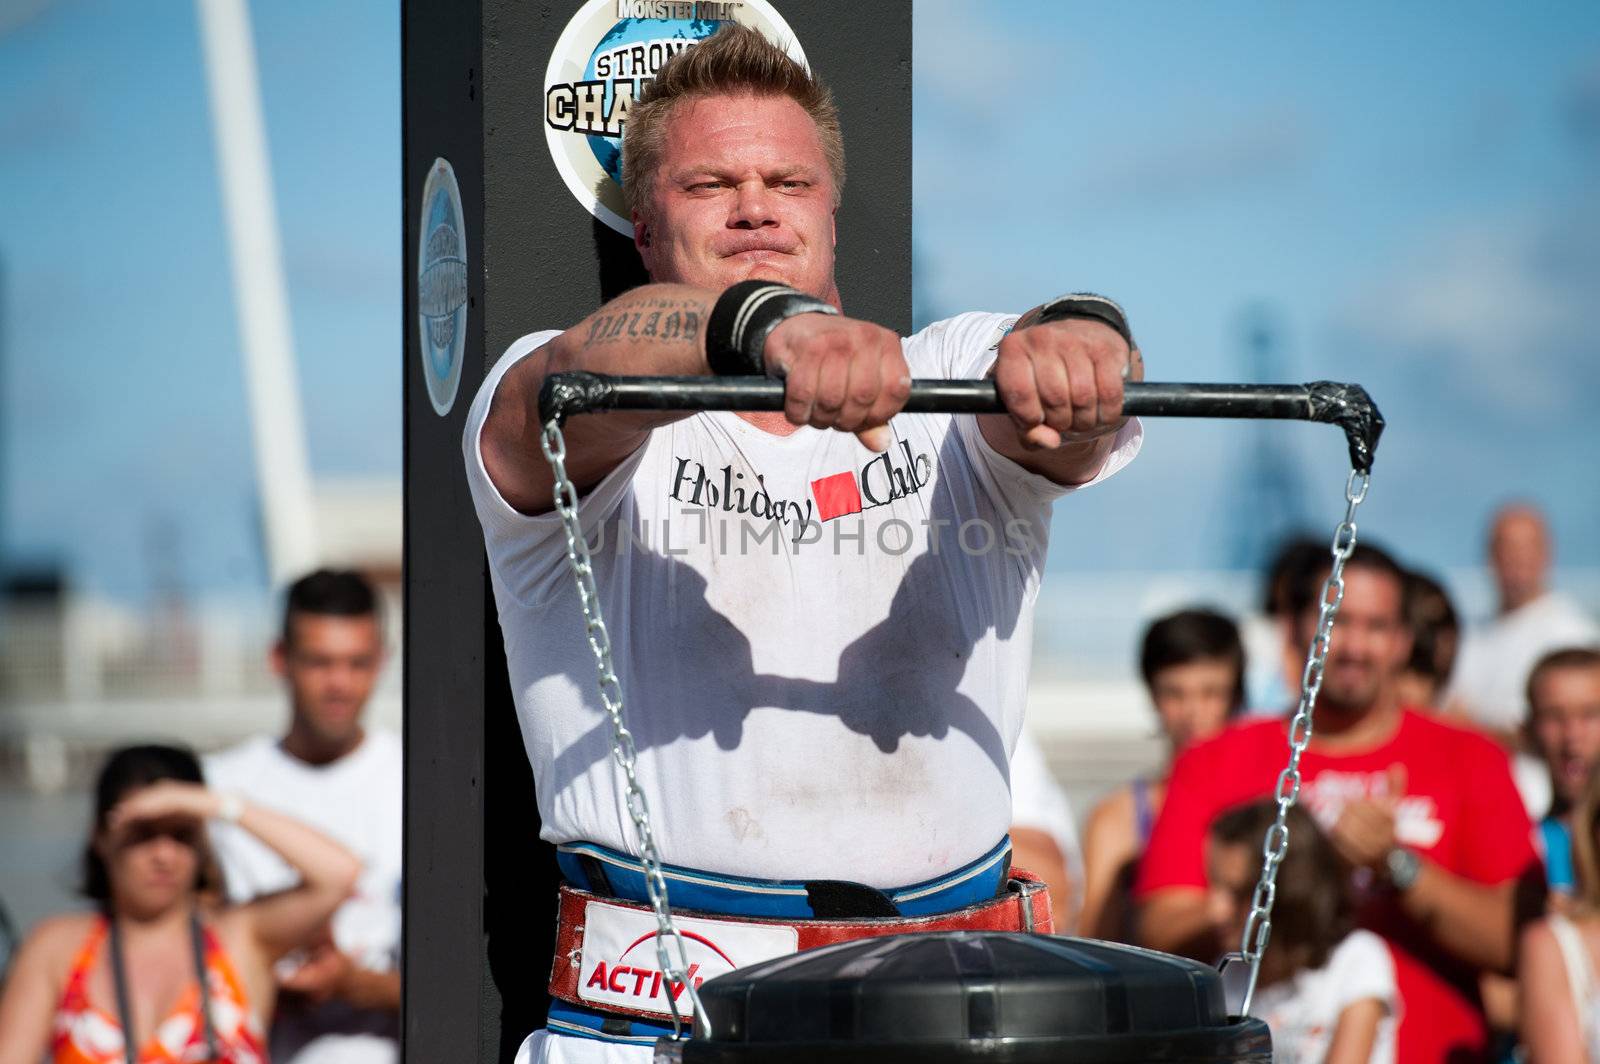 CANARY ISLANDS - SEPTEMBER 03: Tomi Lotta from Finland  lifting a heavy trash can for longest possible time during Strongman Champions League in Las Palmas September 03, 2011 in Canary Islands, Spain